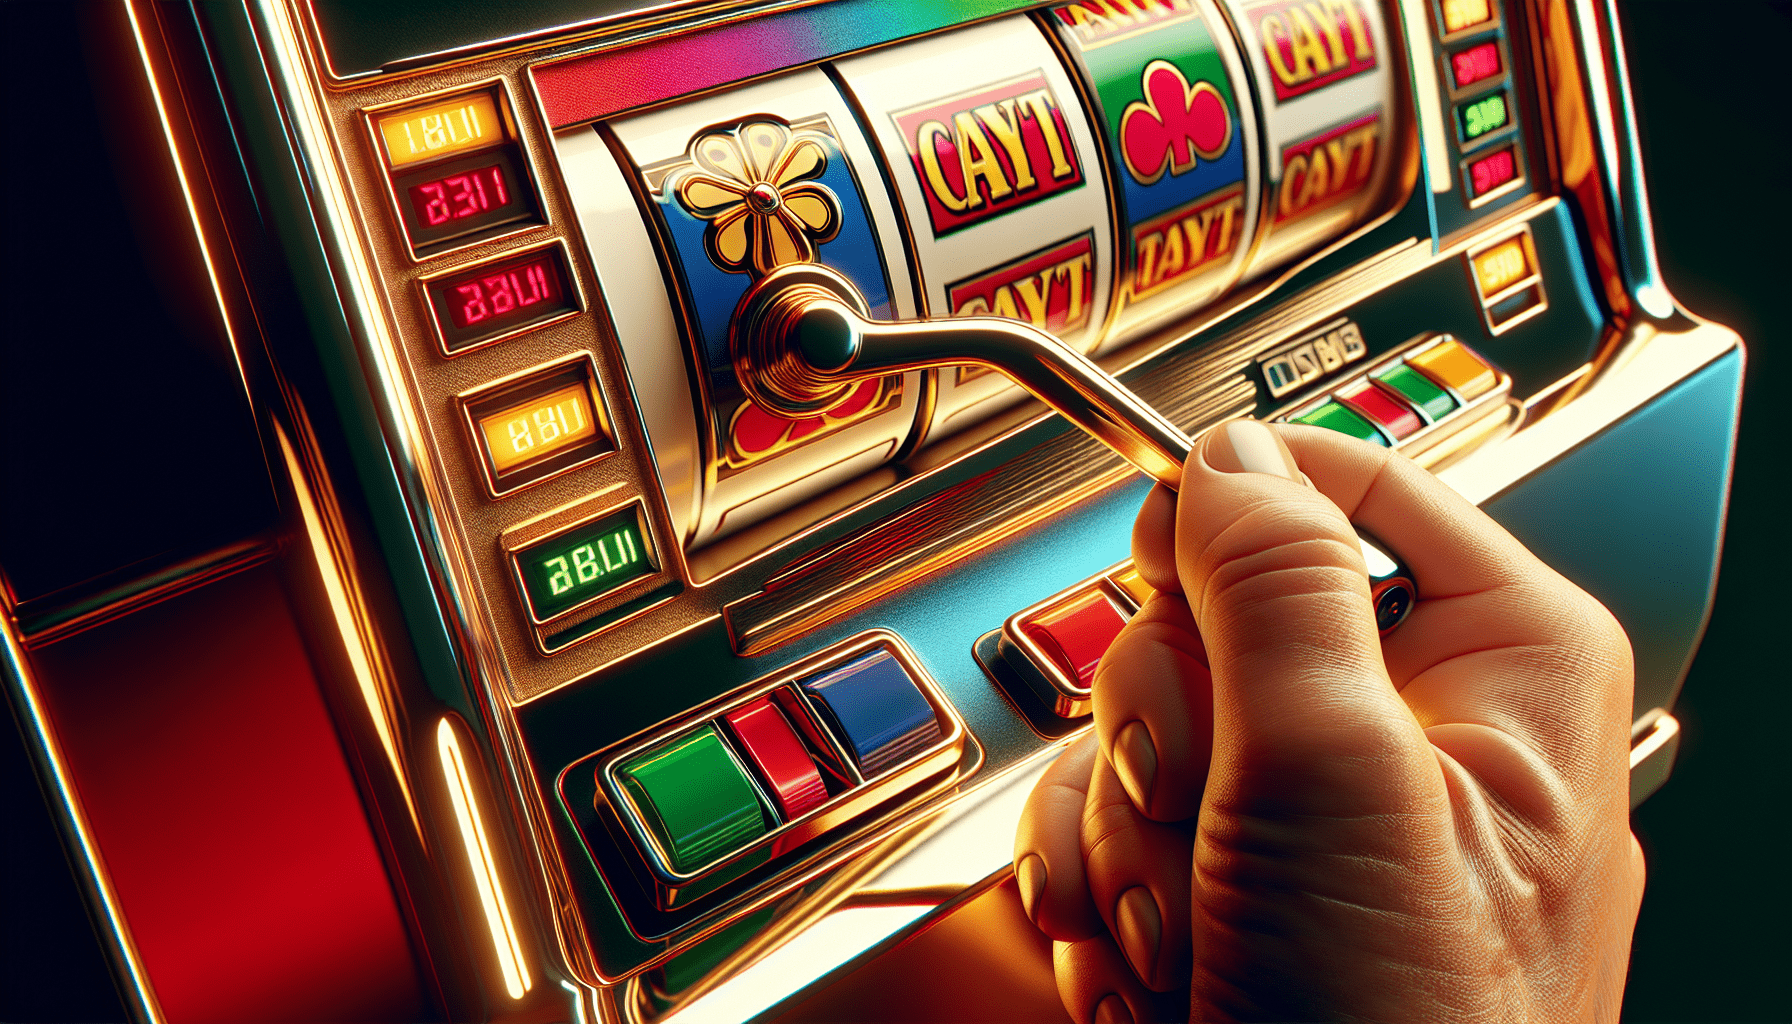 How Do You Know When A Slot Machine Is Ready To Hit?